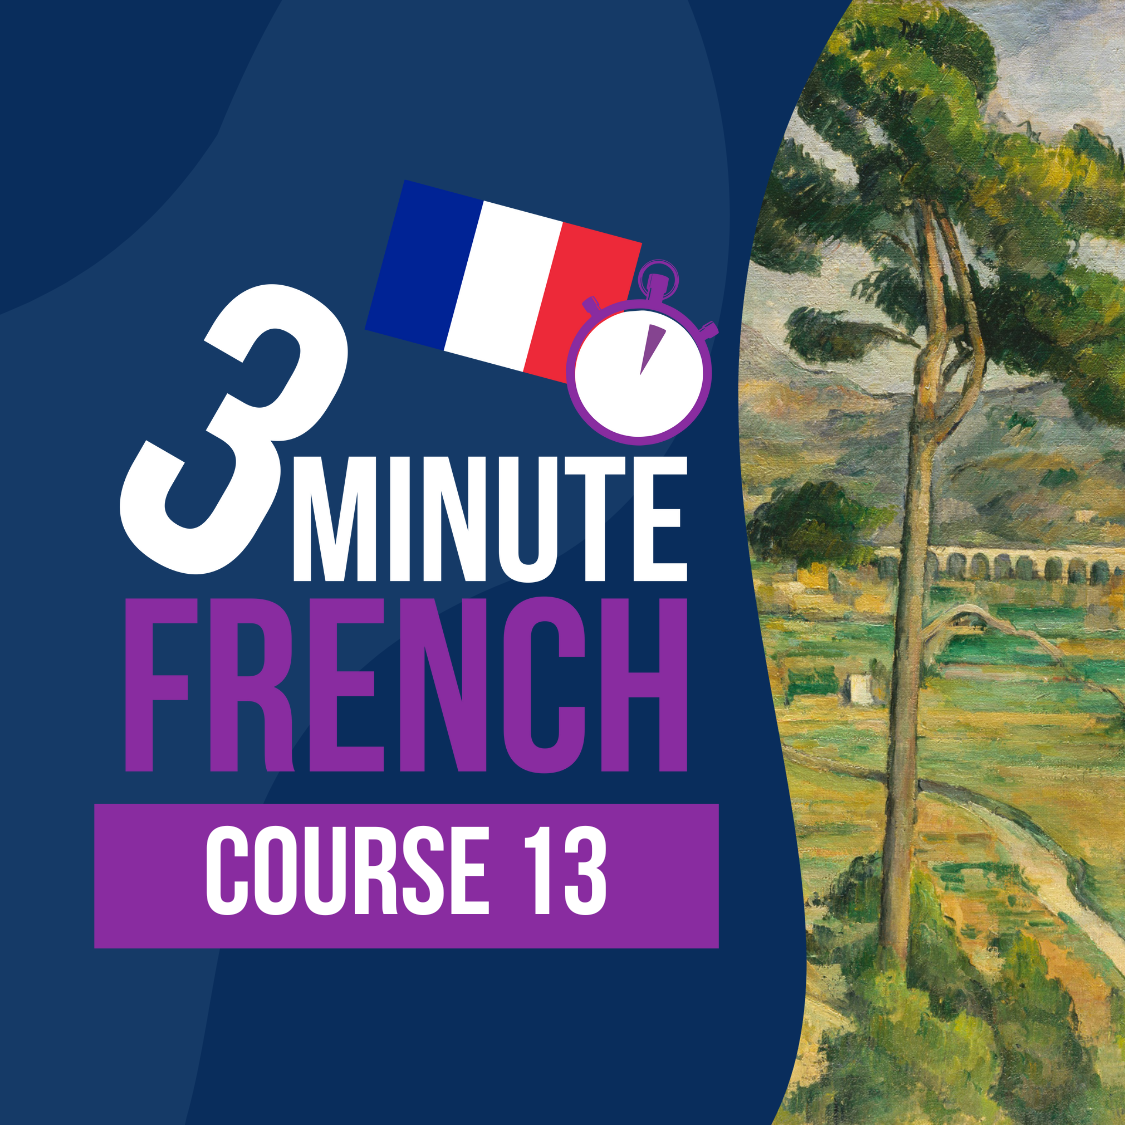 3 Minute French - Course 13